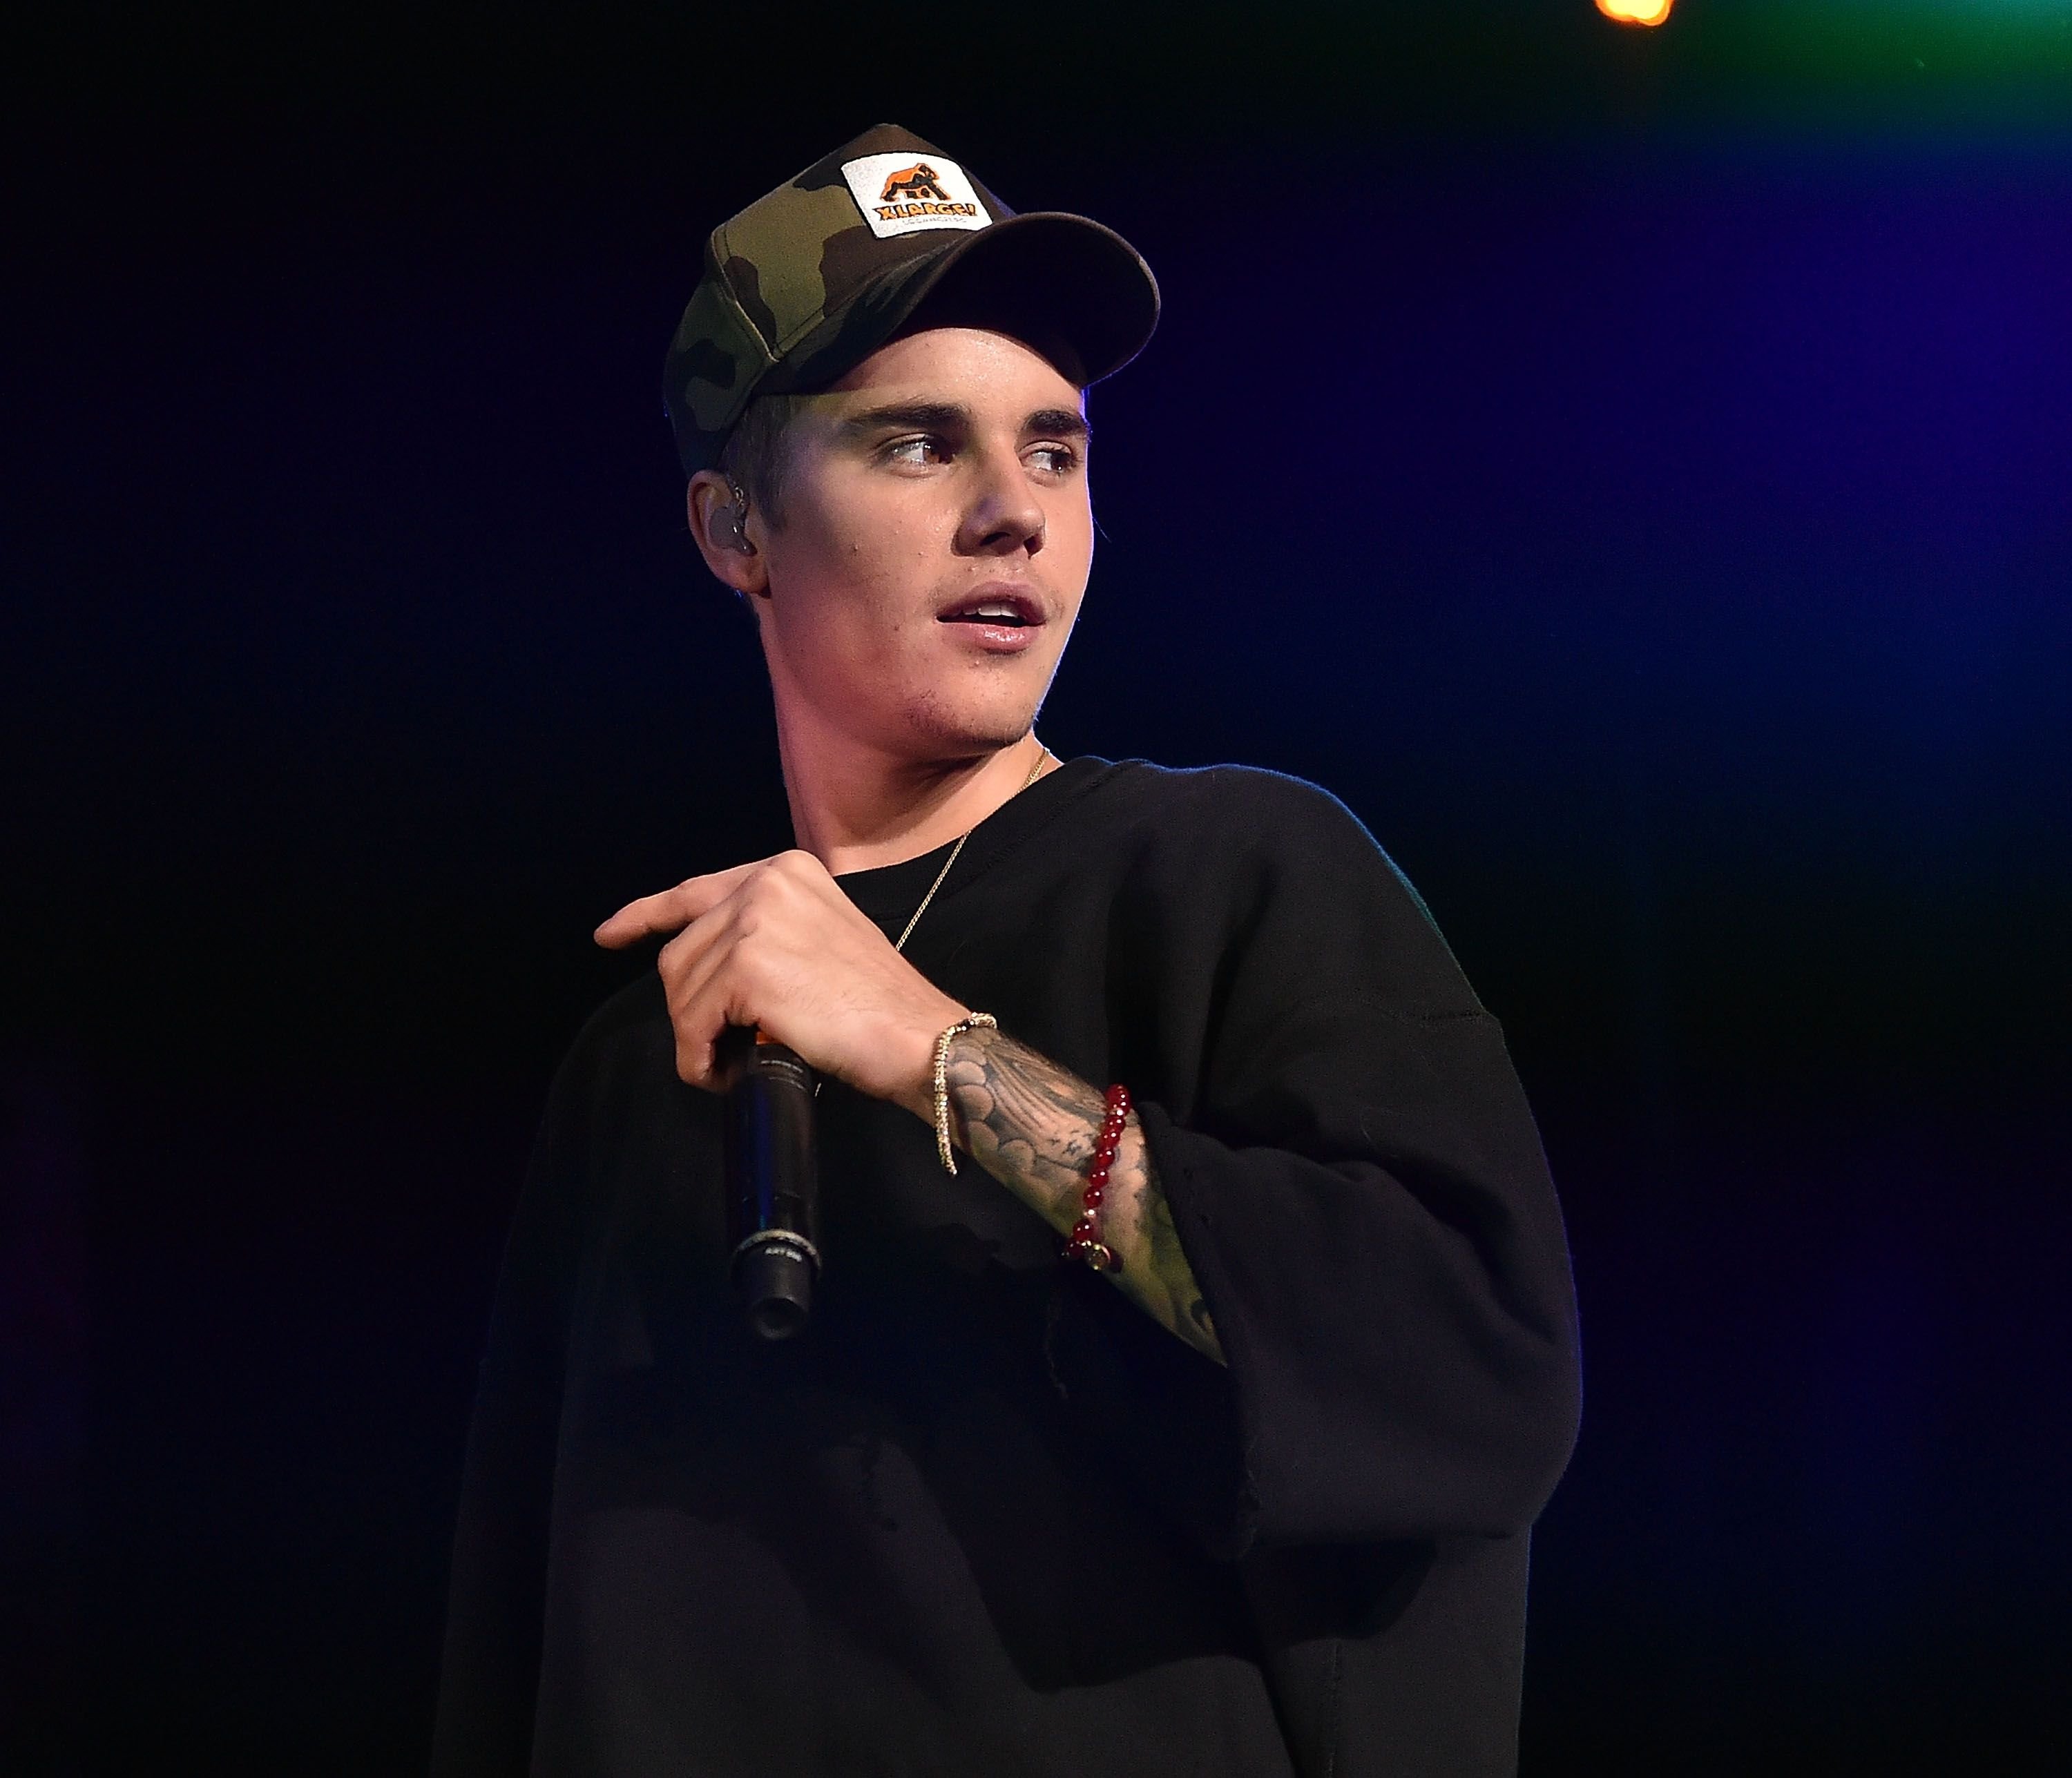 Justin Bieber performs onstage at Power 96.1's Jingle Ball 2015 at Phillips Arena on December 17, 2015 | Photo: Getty Images